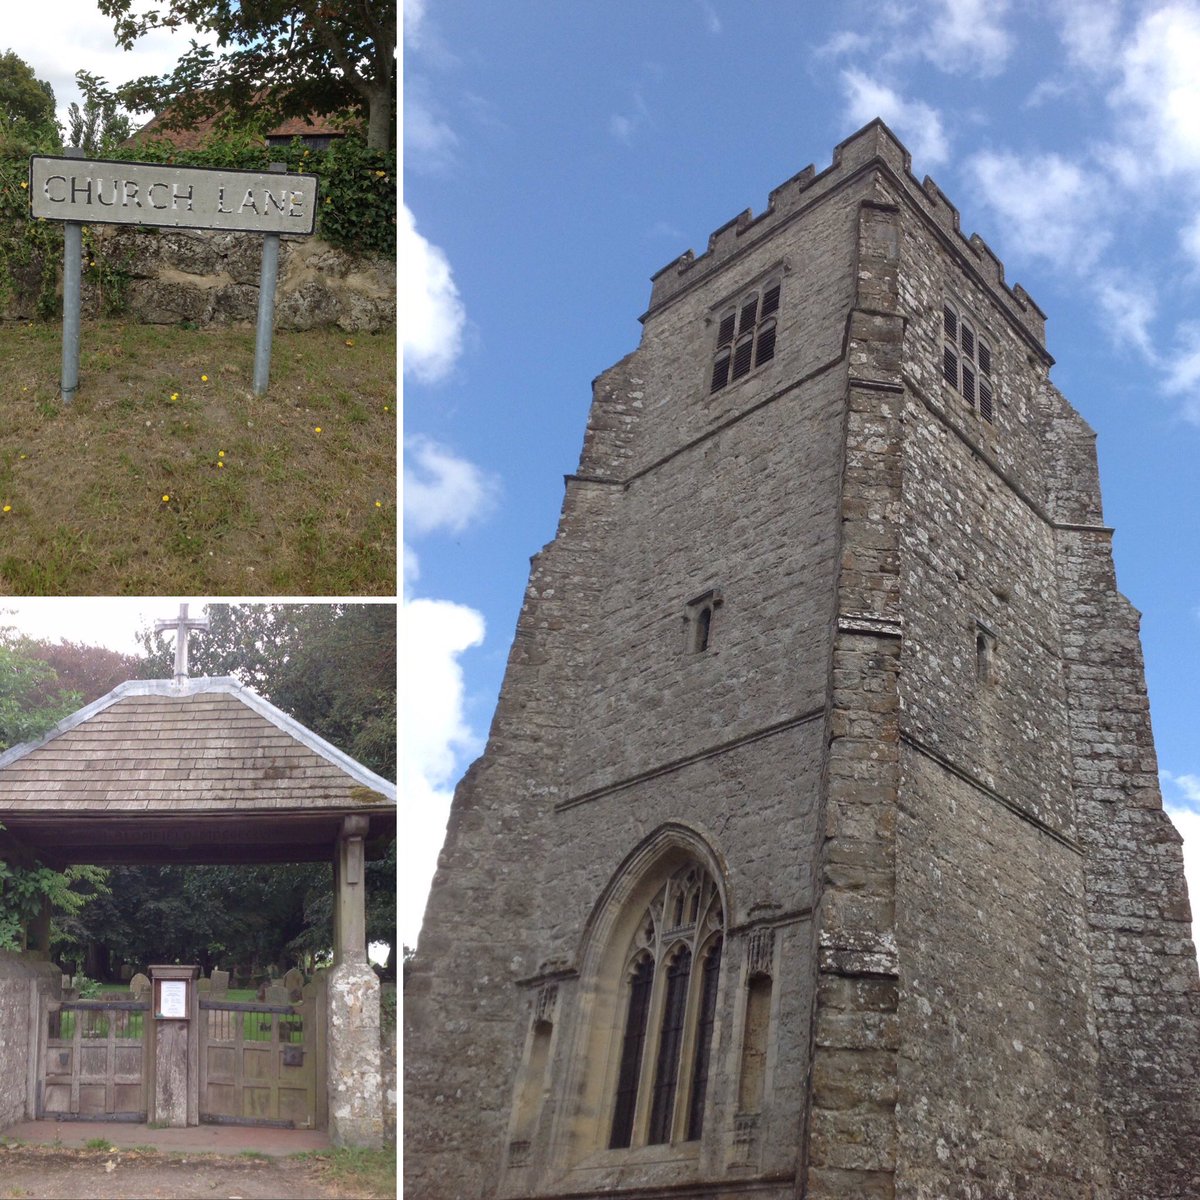 Today's #KentChurchesAdvent23 features ##KentChurches road signs!
Have you ever noticed how there’s usually a church in “Church Road” or Church Lane?! 
Here we see Ashford St Mary’s, Christ Church South Ashford, St Leonard’s Hythe & Saint Martin’s Aldington